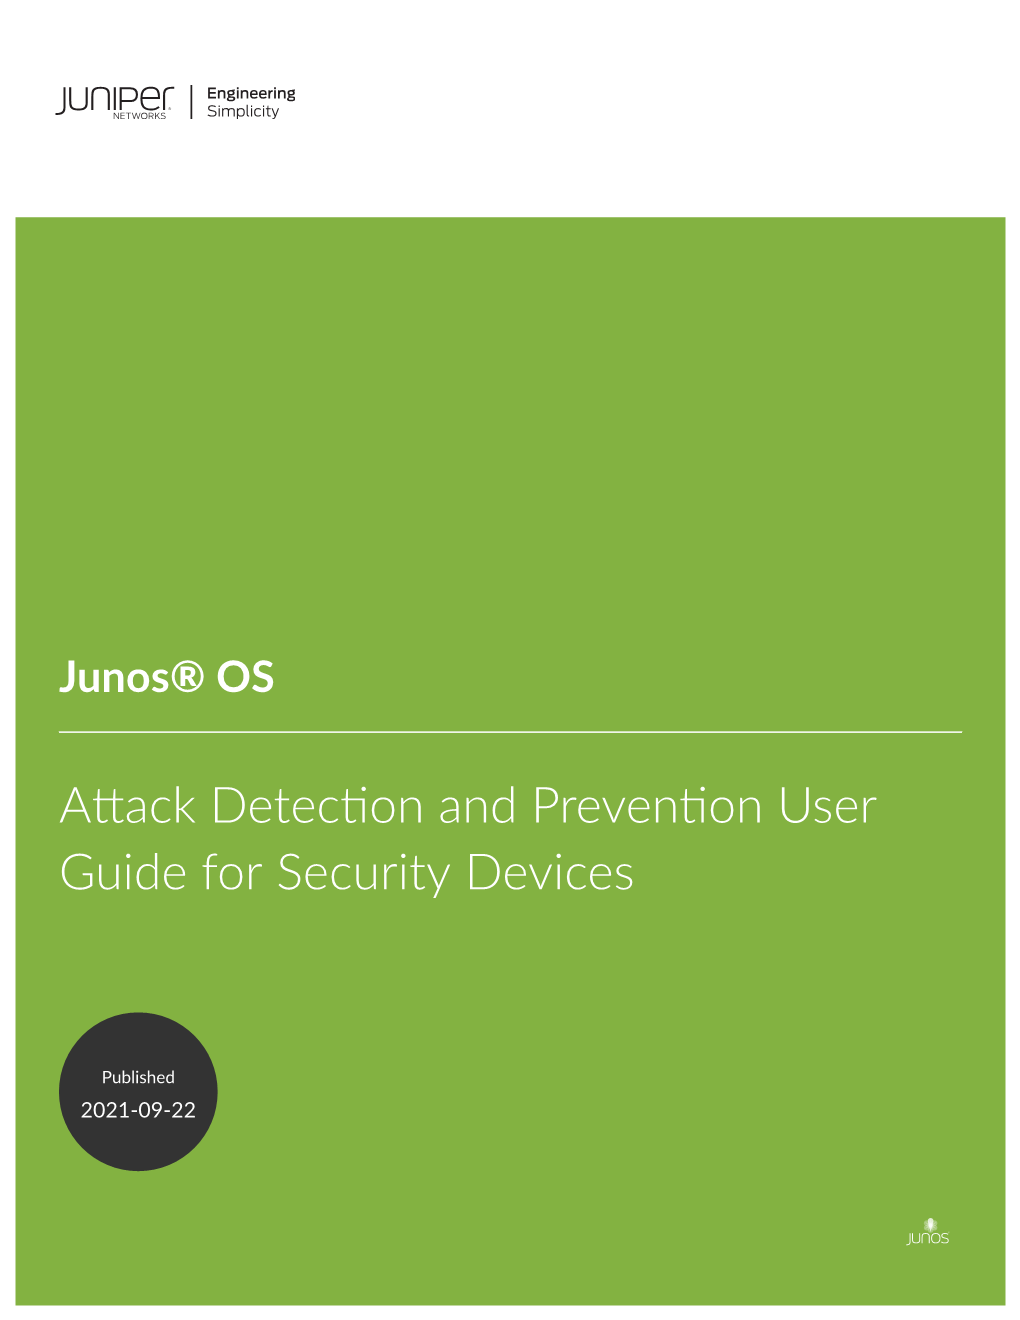 Junos® OS Attack Detection and Prevention User Guide for Security Devices Copyright © 2021 Juniper Networks, Inc